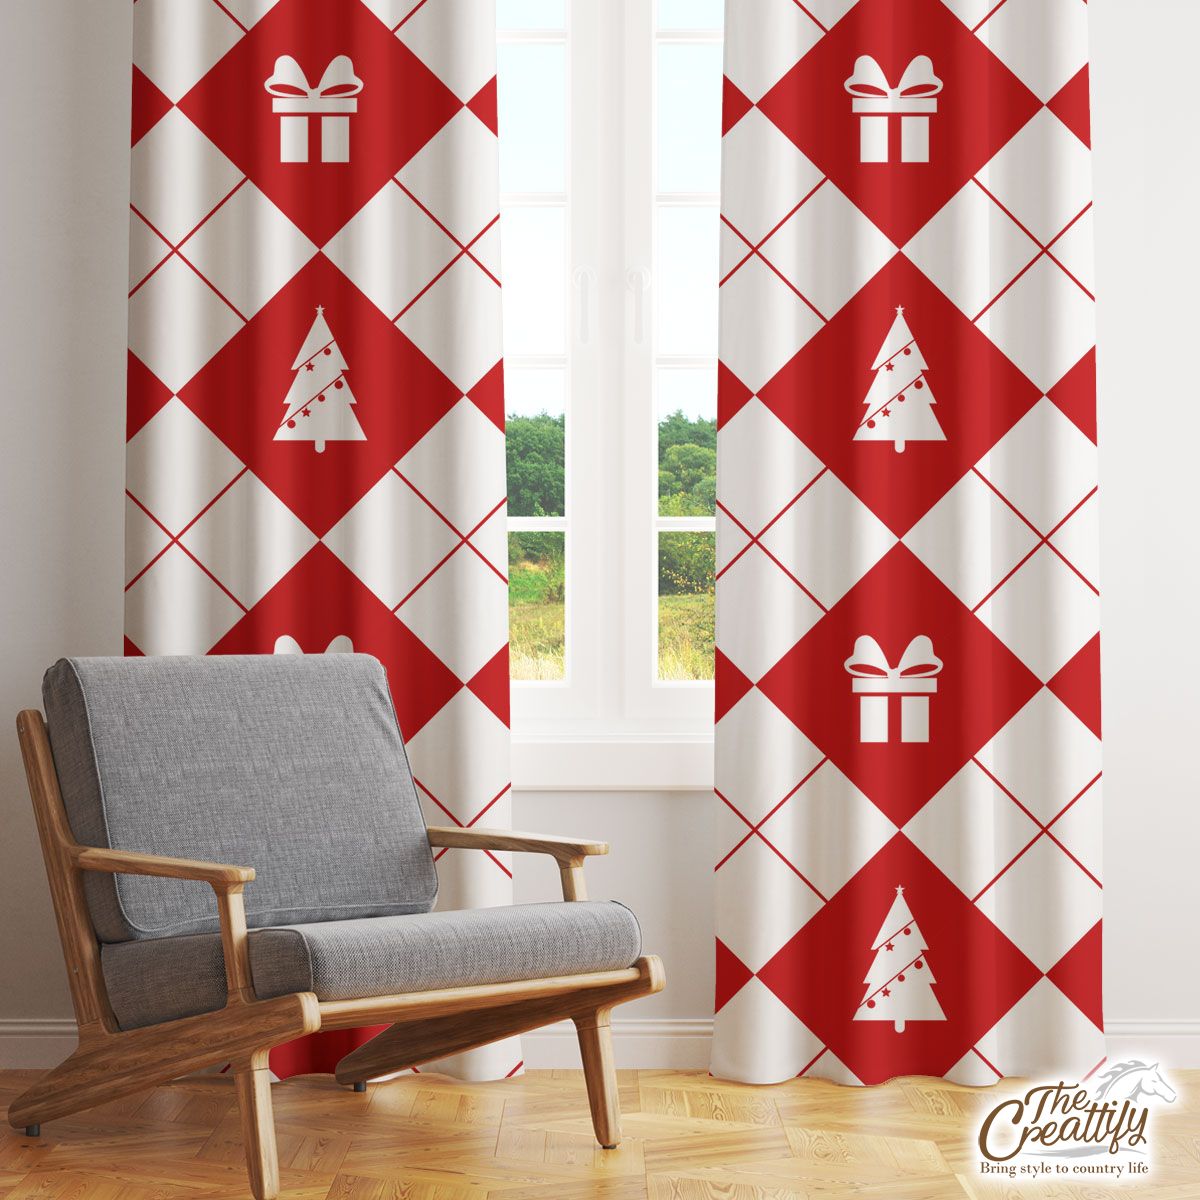 Christmas Gifts And Pine Tree Decorated With Lights On Red And White Background Window Curtain